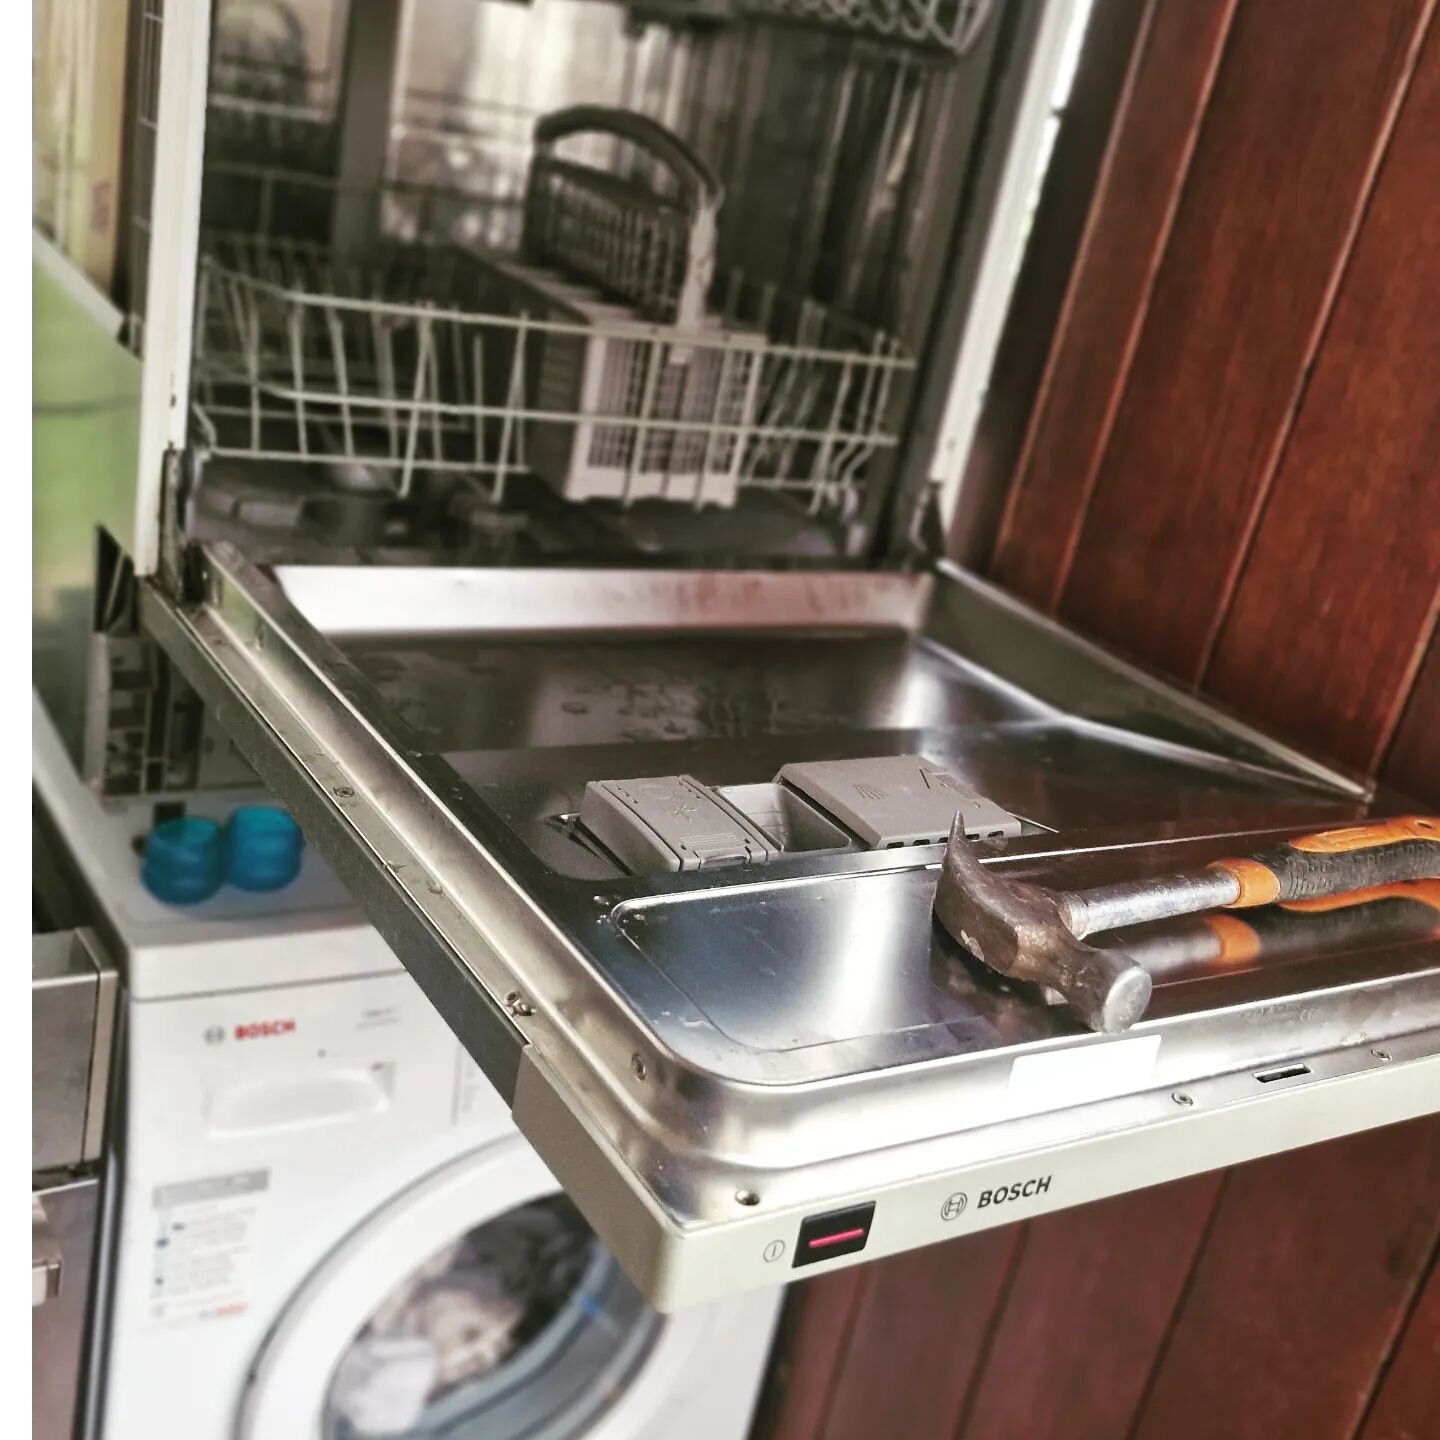 An integrated dishwasher doesn't really work as a stand alone because the door isn't heavy enough without the unit front, and keeps springing back up when loading and unloading. But the problem can be easily fixed with a hammer or similarly weighted 